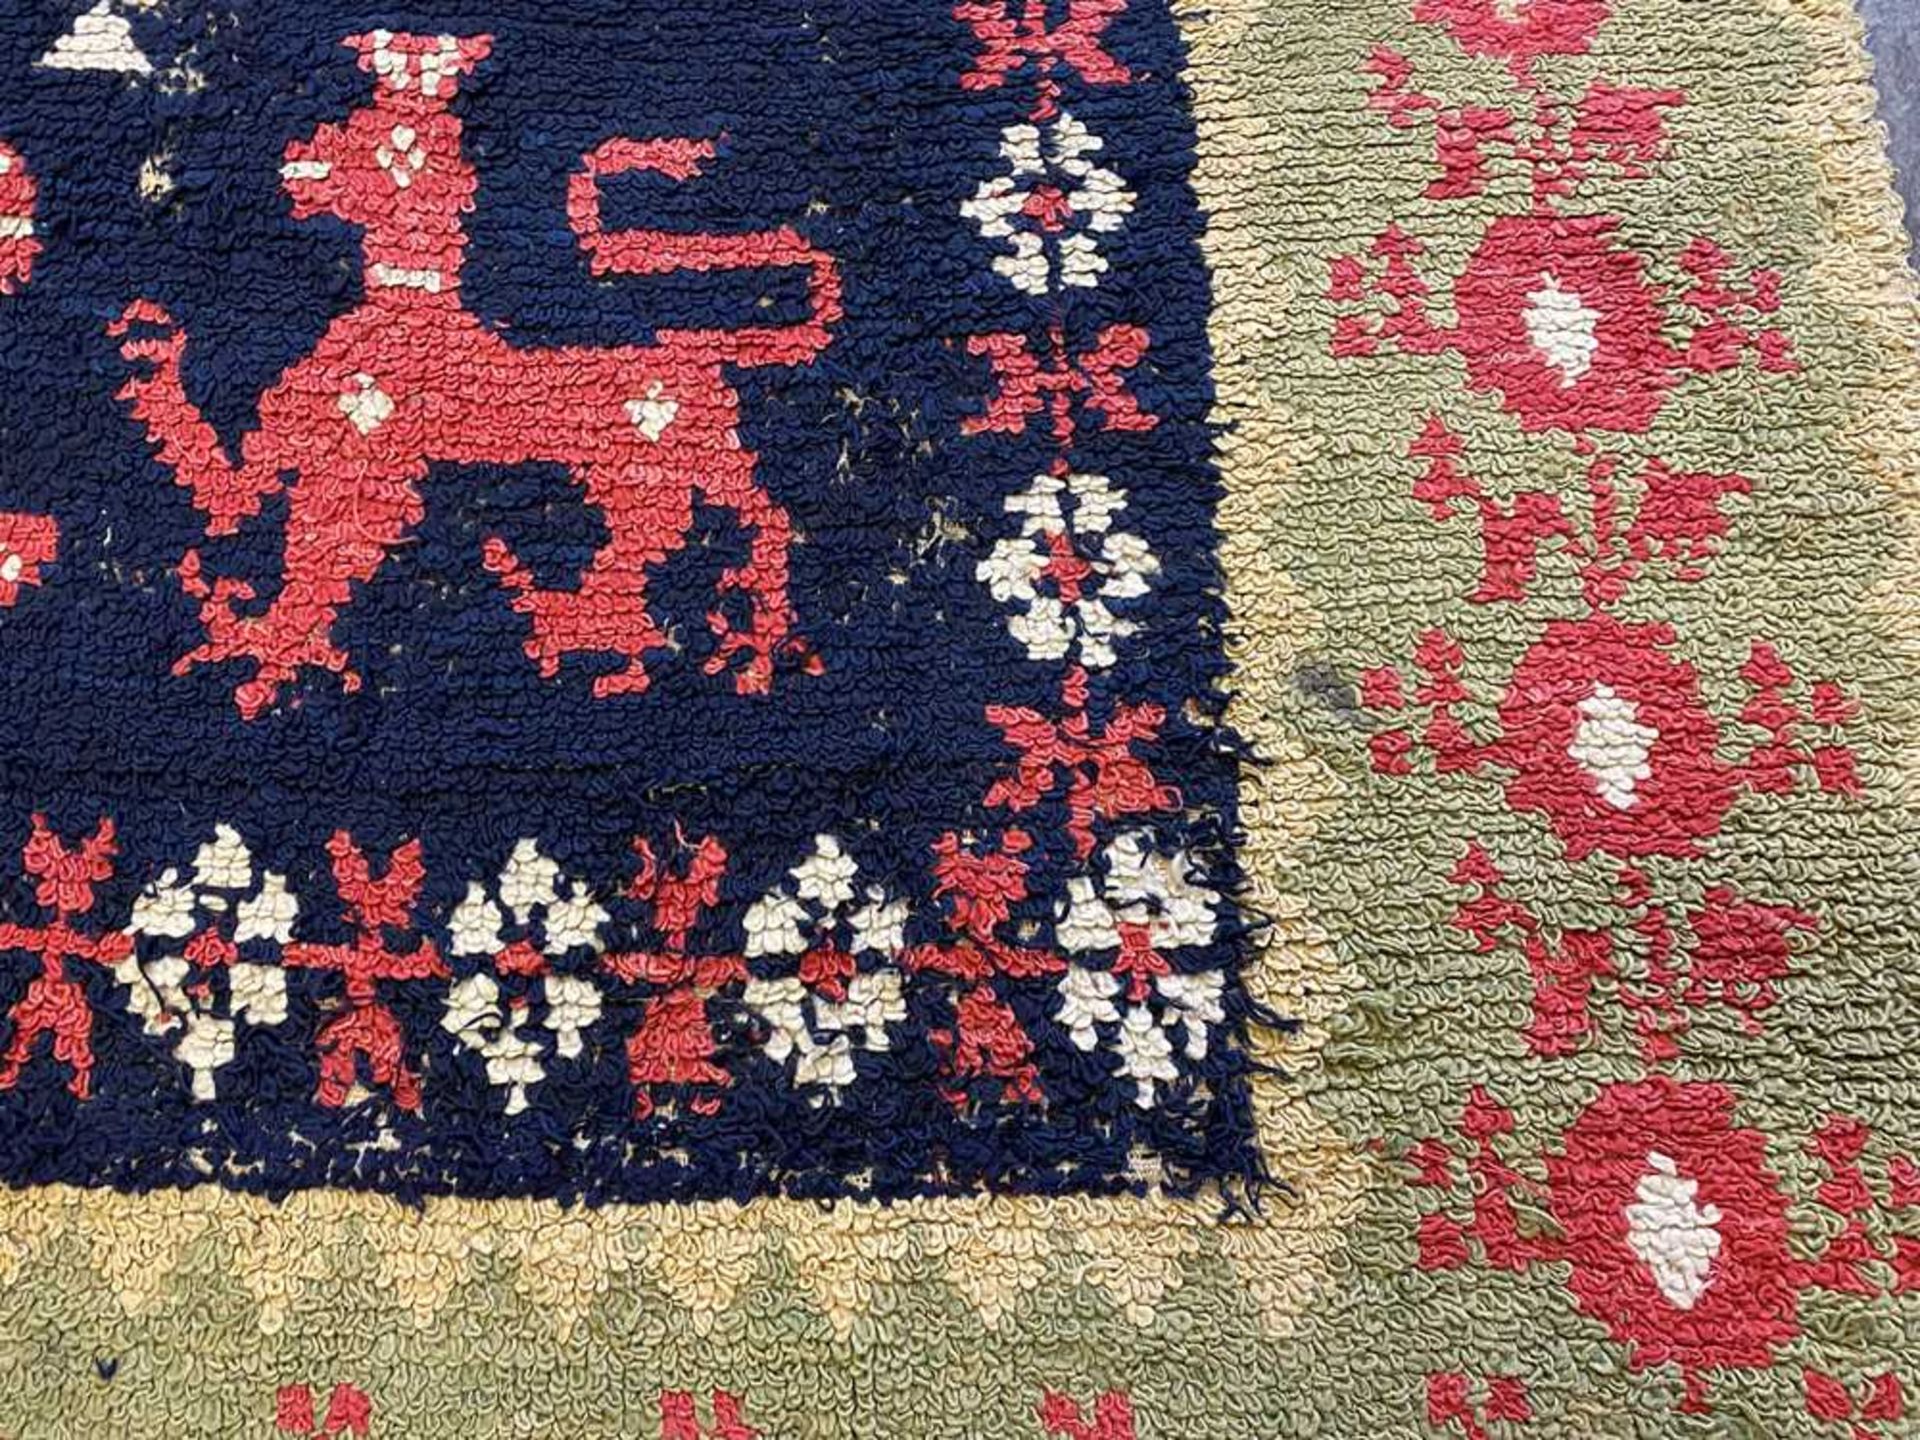 ALPUJARRA CARPET SOUTH SPAIN, LATE 18TH/EARLY 19TH CENTURY - Image 8 of 11